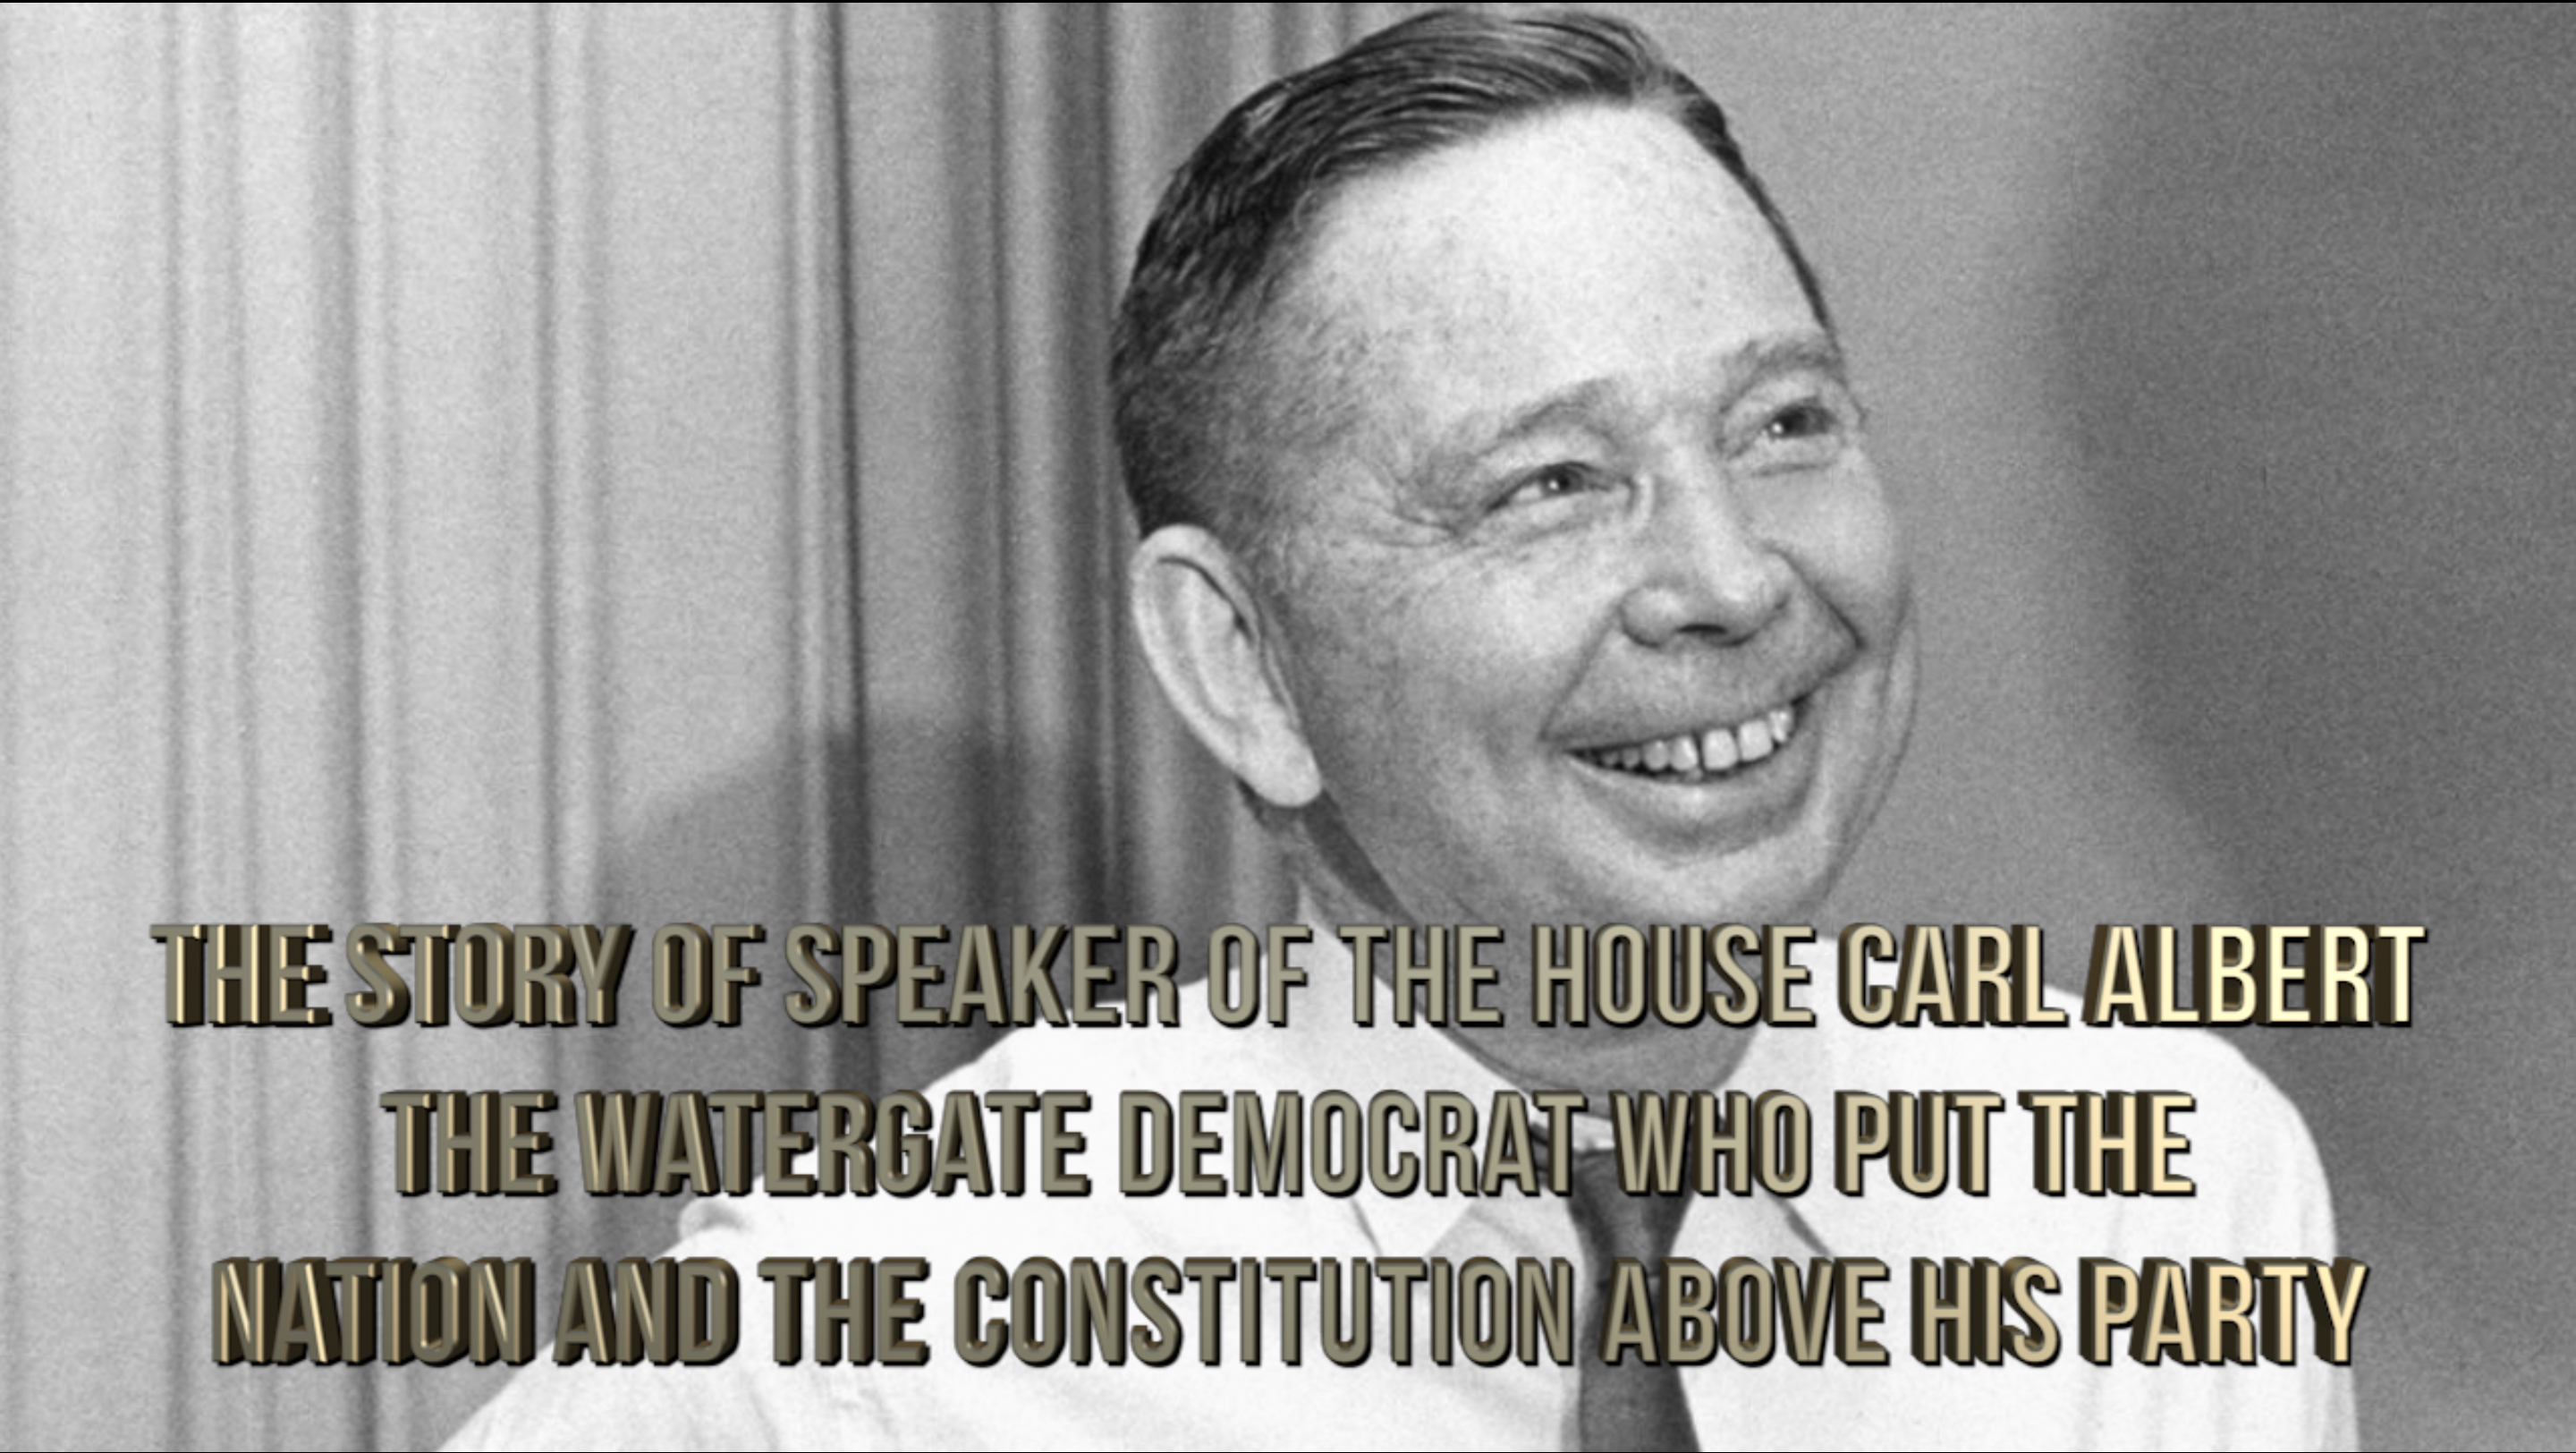 The Story of Speaker of the House Carl Albert: The Watergate Democrat Who Put the Nation and the Constitution Above His Party